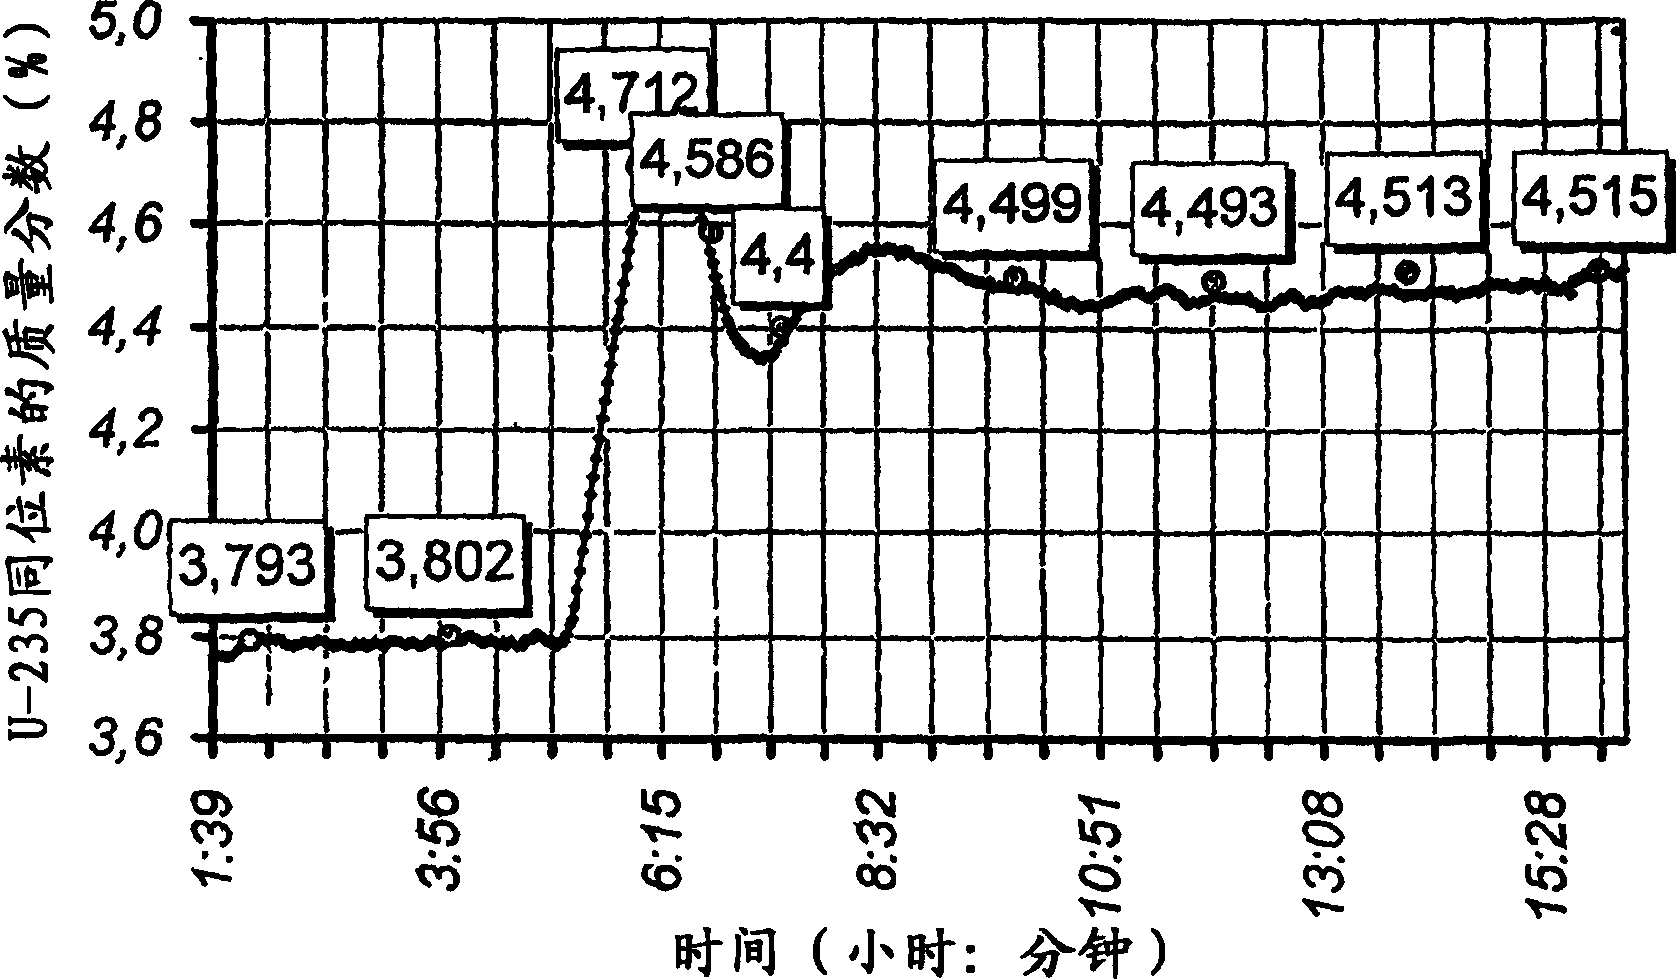 Method of controlling mass fraction of uranium-235 isotope in gas phase of uranium hexafluoride and measuring system for implementation of the method